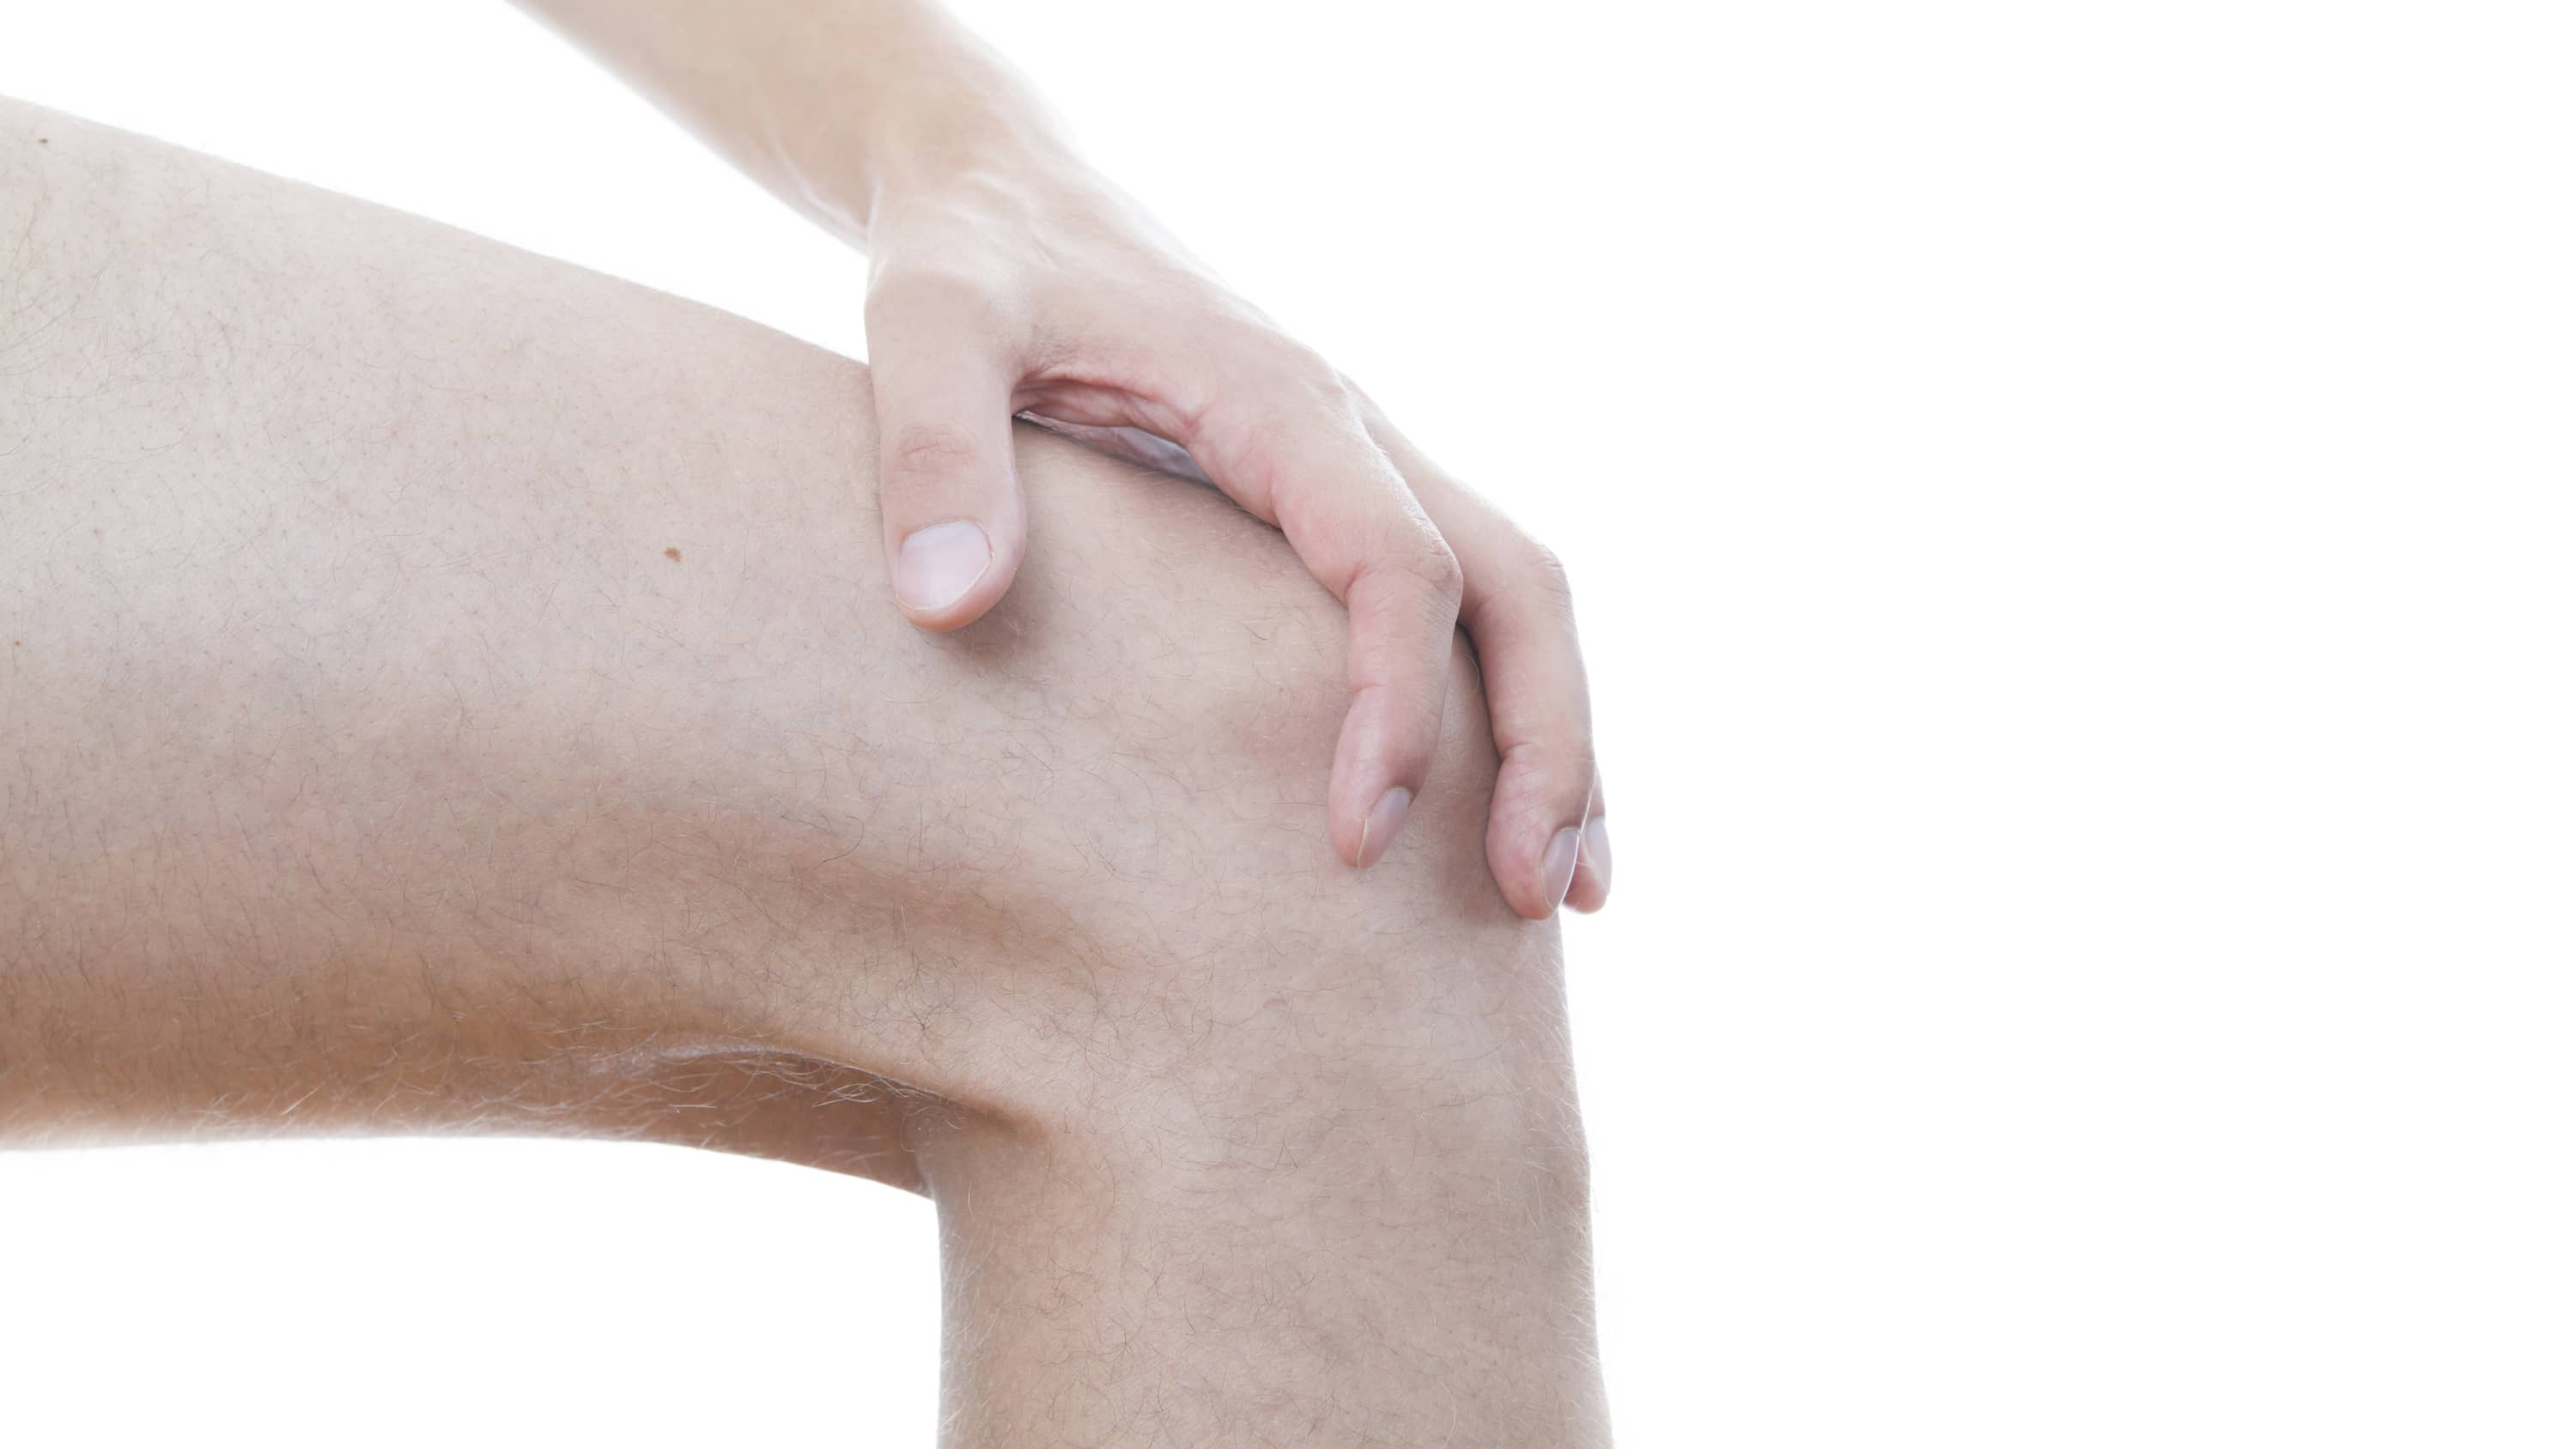 A hand itches the top of a bare knee, possibly because of eczema